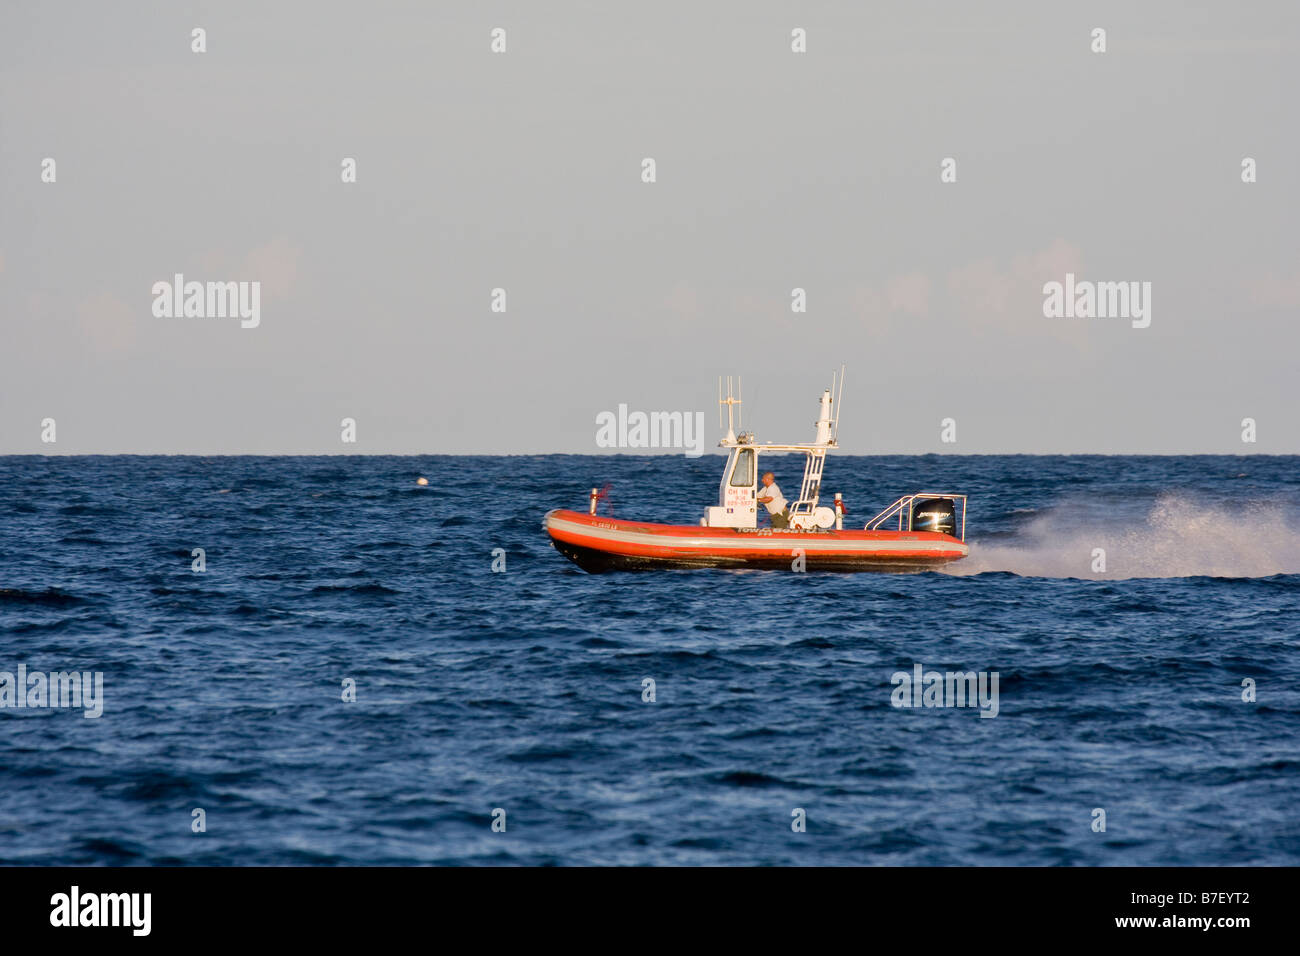 Small fast boat on ocean Stock Photo